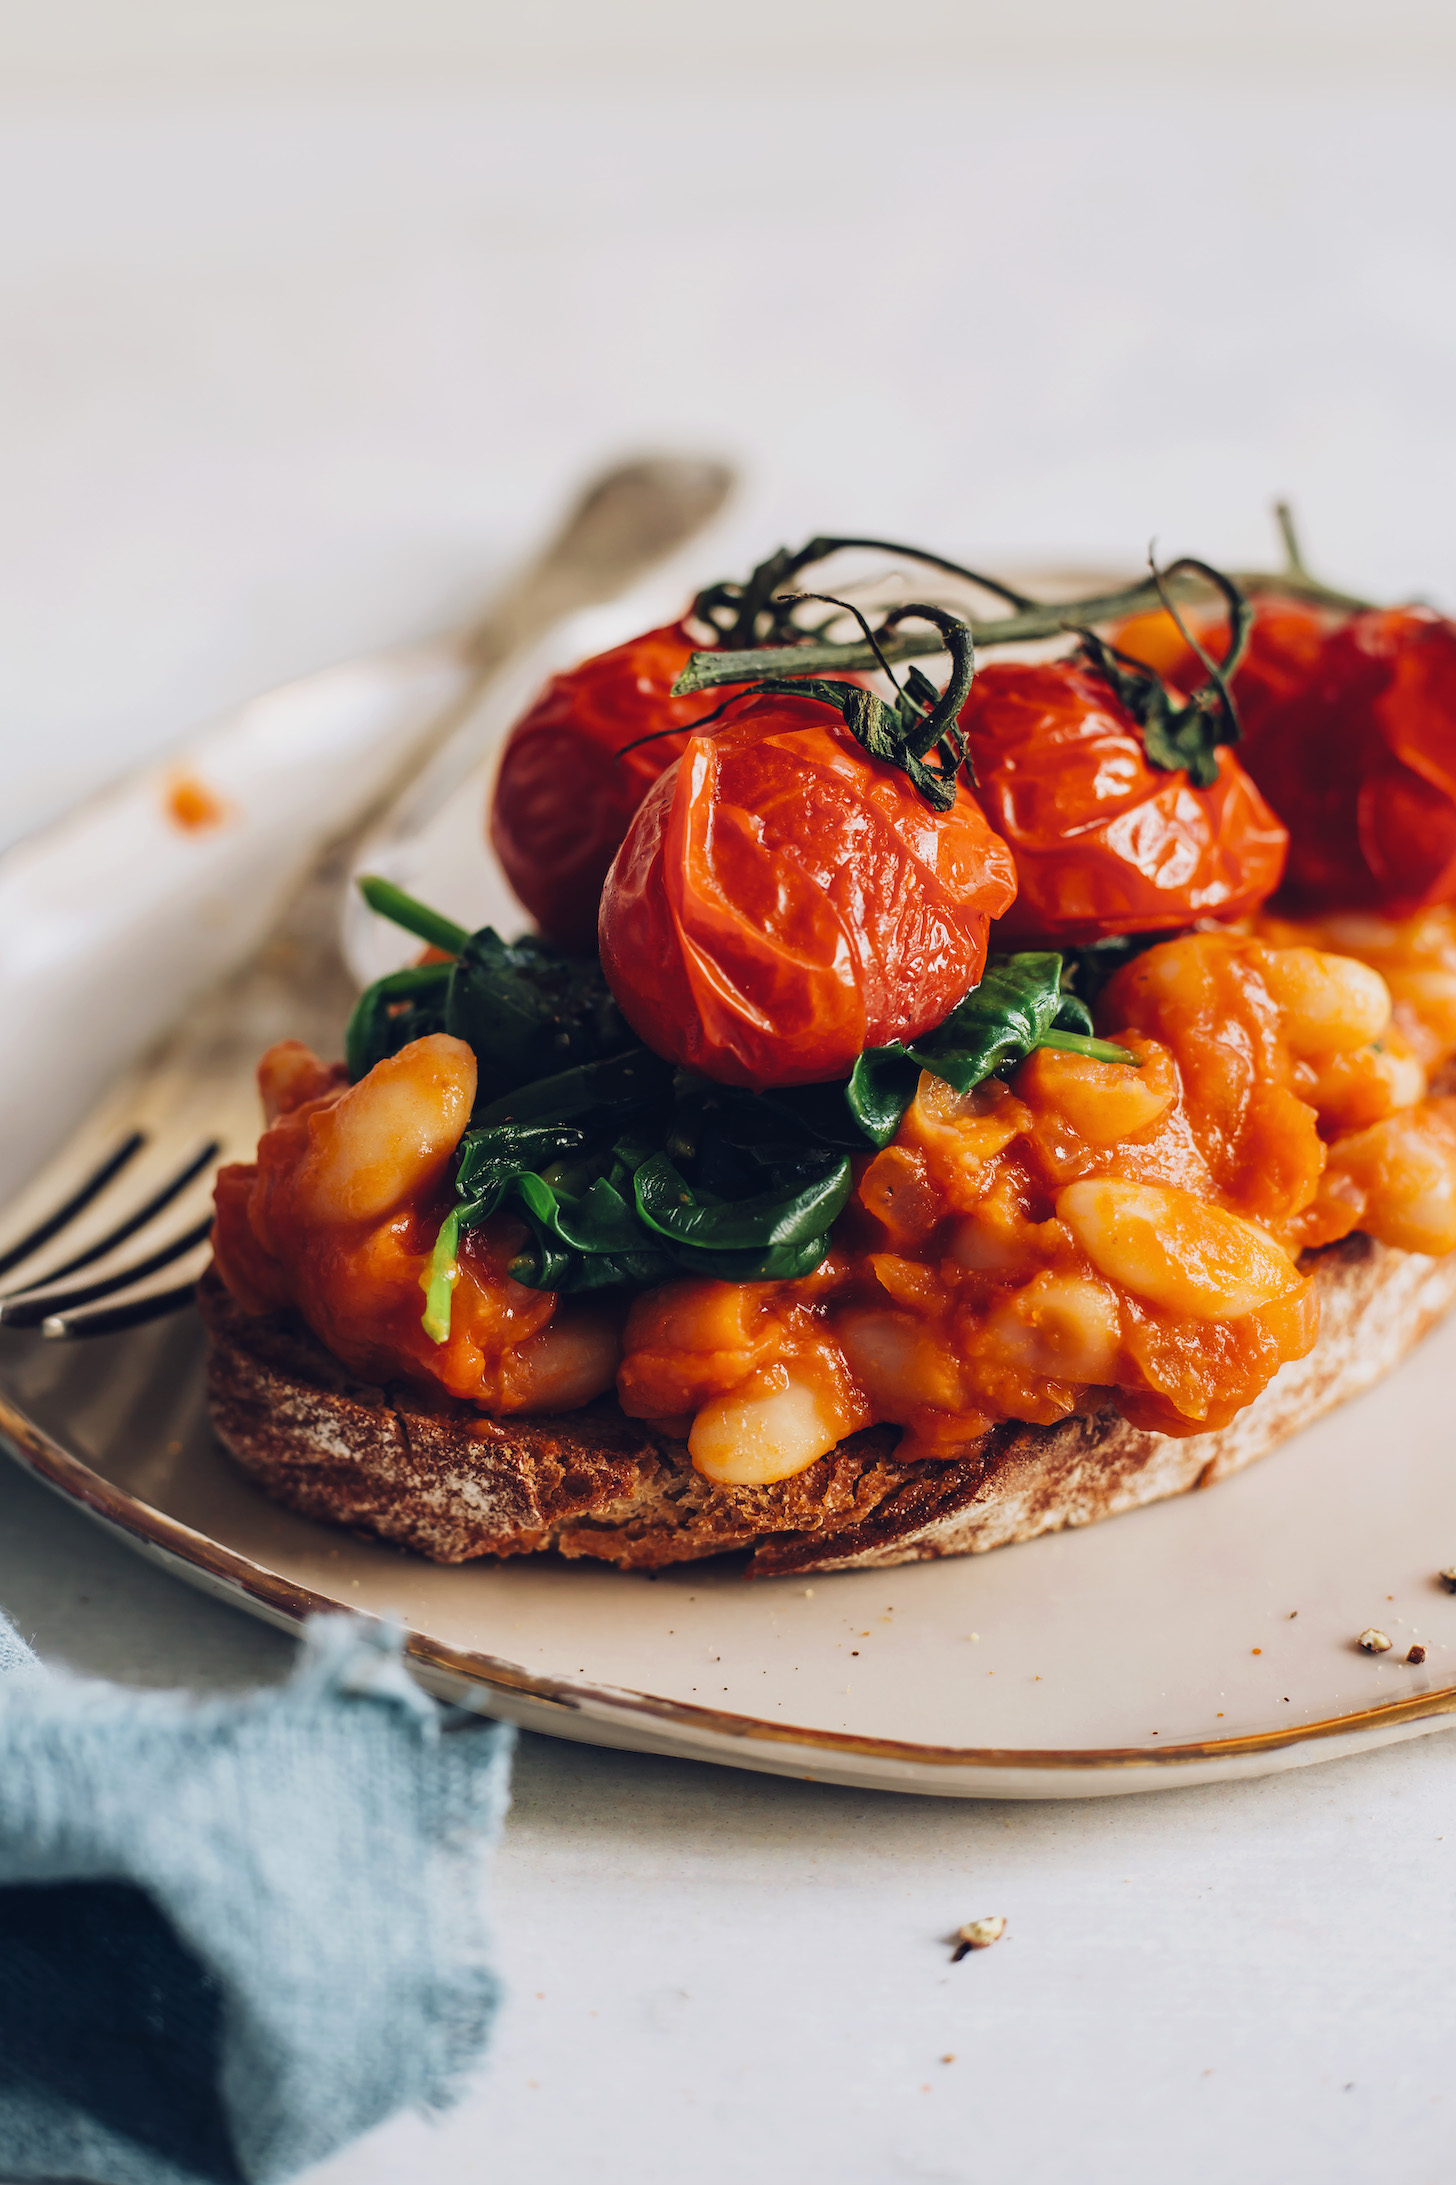 https://minimalistbaker.com/wp-content/uploads/2020/12/Vegan-Baked-Beans-on-Toast-An-easy-flavorful-British-inspired-meal.-1-pot-and-30-minutes-minimalistbaker-recipe-beans-plantbased5.jpg